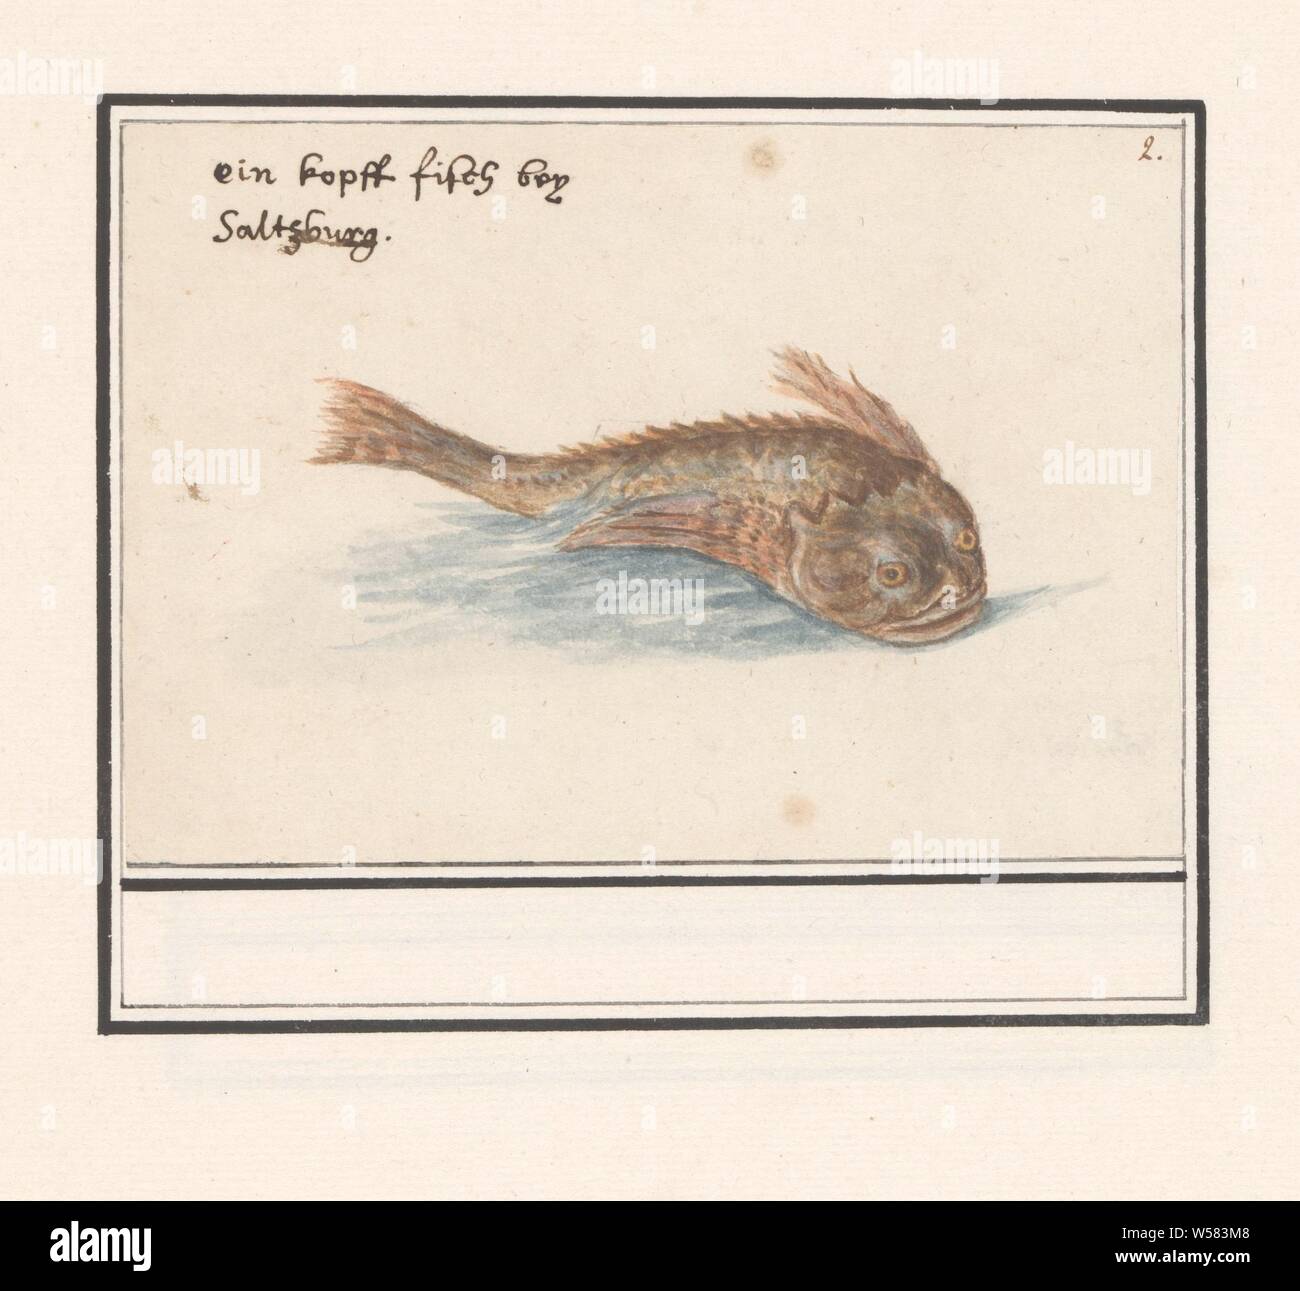 Unknown fish, An unidentified fish. According to the inscription a 'kopfffisch' caught near Salzburg. Numbered top right: 2. Part of the sixth album with drawings of fish, shells and insects. Sixth of twelve albums with drawings of animals, birds and plants known around 1600, commissioned by Emperor Rudolf II. With explanations in Dutch, Latin and French, bony fishes, Anselmus Boetius de Boodt, 1596 - 1610, paper, pencil, chalk, watercolor (paint), deck paint, ink, pen, h 105 mm × w 151 mm Stock Photo